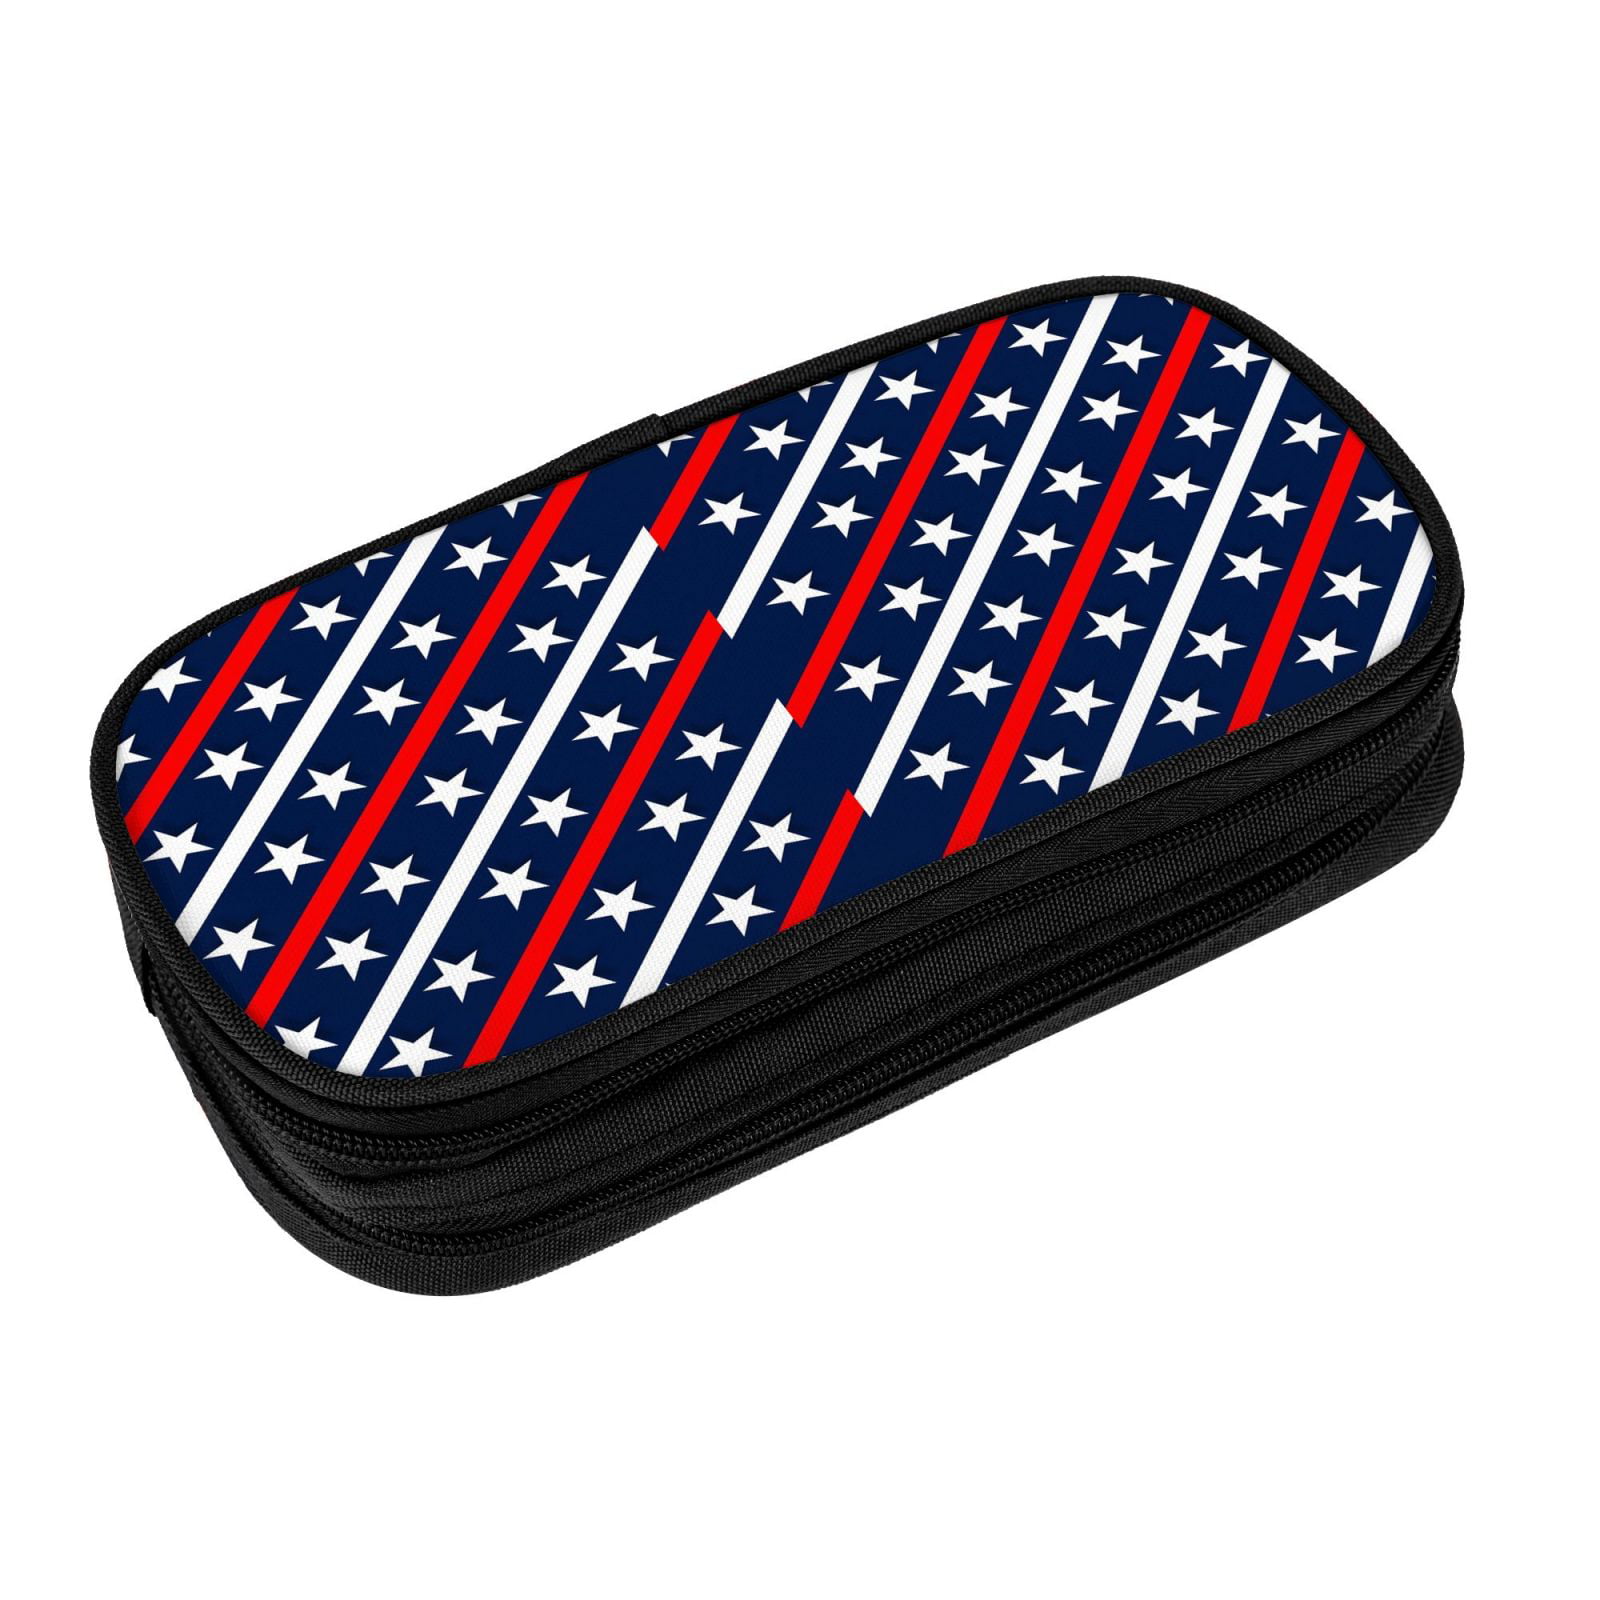 Bags White Patriotic Large Stars Compartments Blue with Strips Red Blue Pencil Zipper XMXY Portable Pencil Case, Capacity